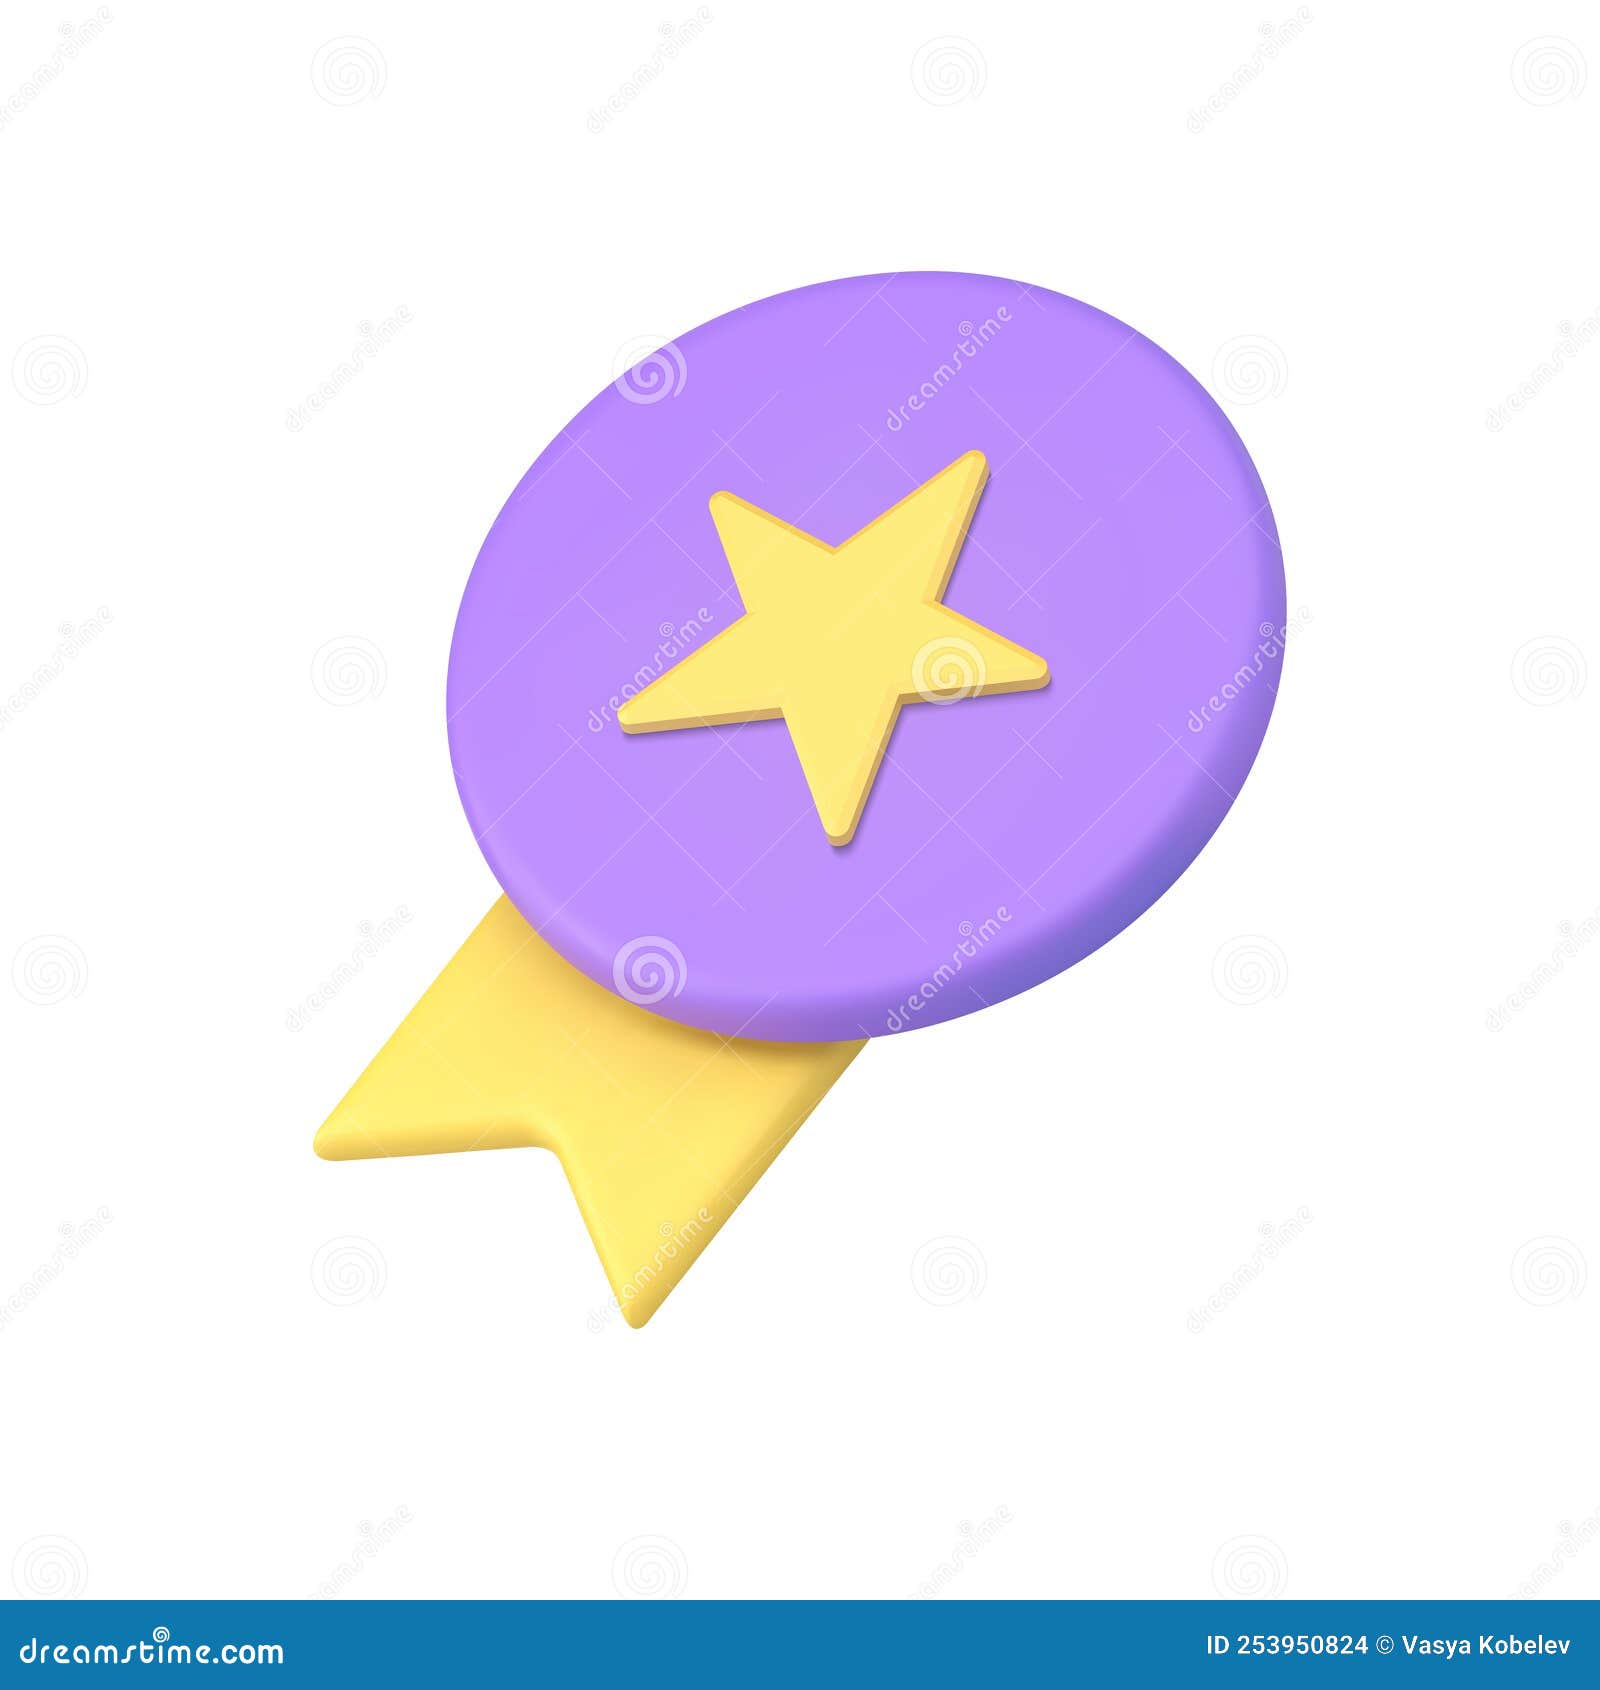 https://thumbs.dreamstime.com/z/purple-medal-star-badge-yellow-ribbon-isometric-award-best-champion-competition-win-d-icon-vector-purple-medal-star-badge-yellow-253950824.jpg